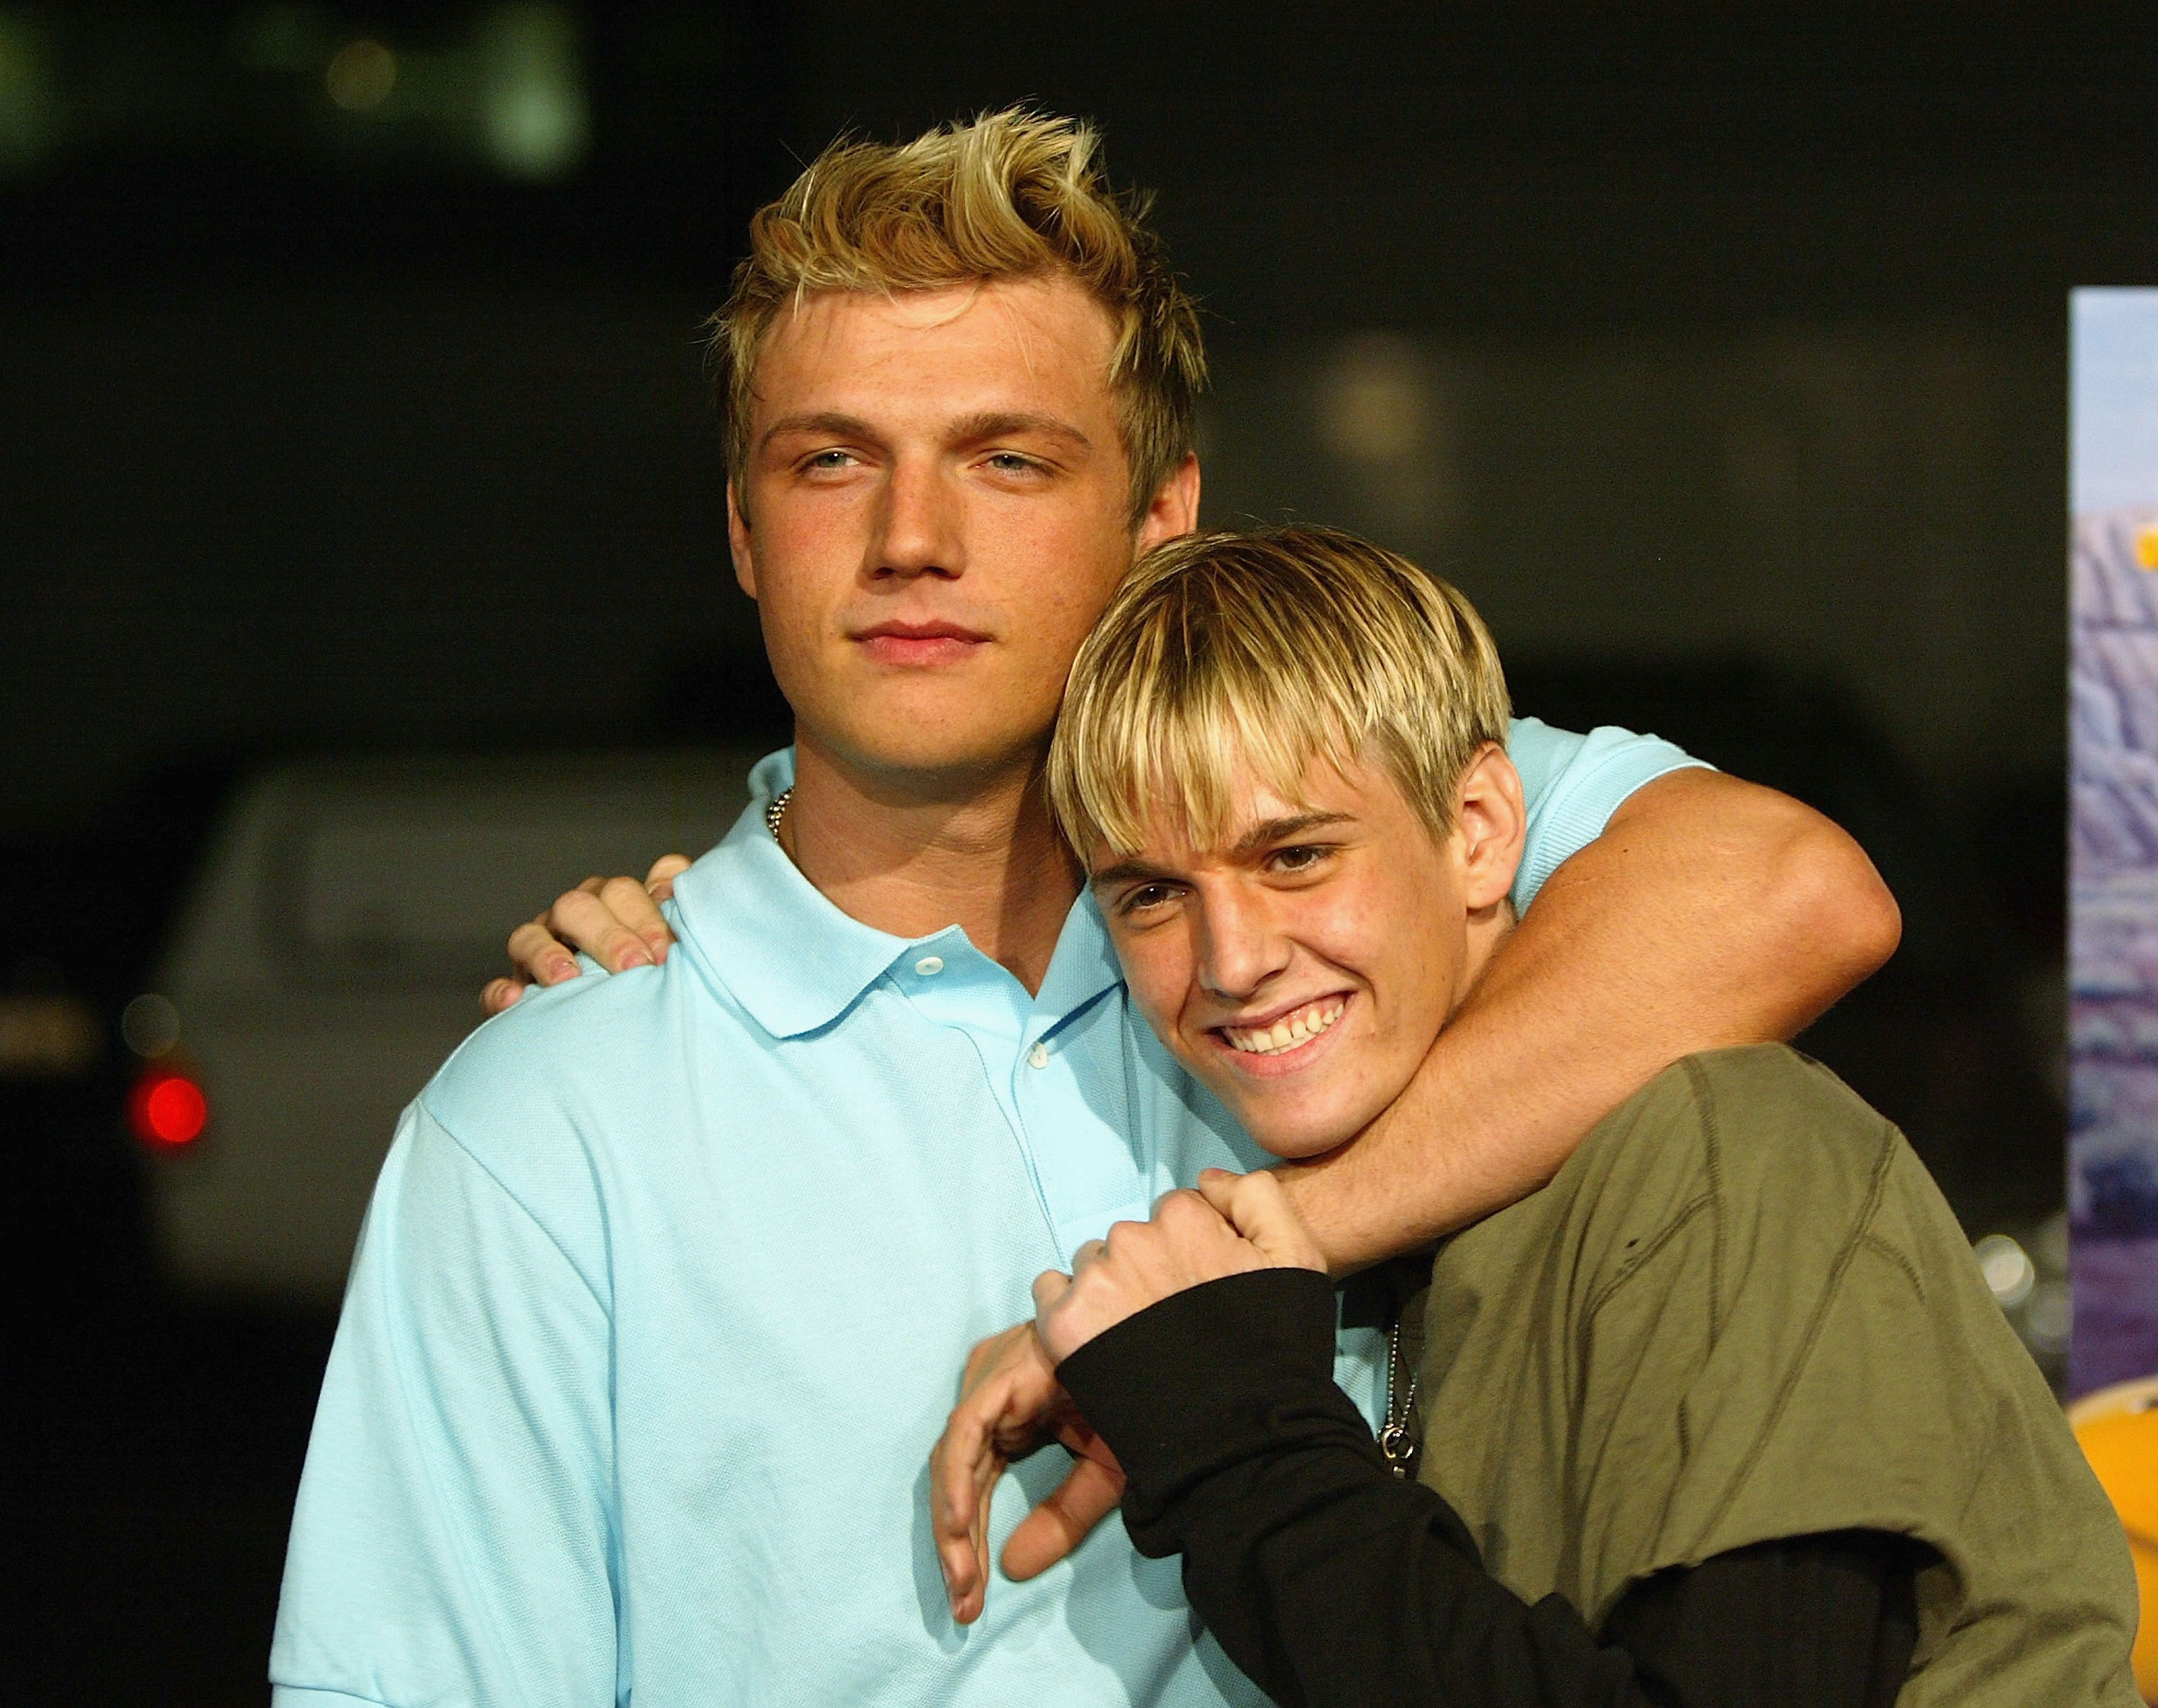 Aaron and Nick Carter at The Spider Club on April 14, 2004 in Hollywood, California | Source: Getty Images